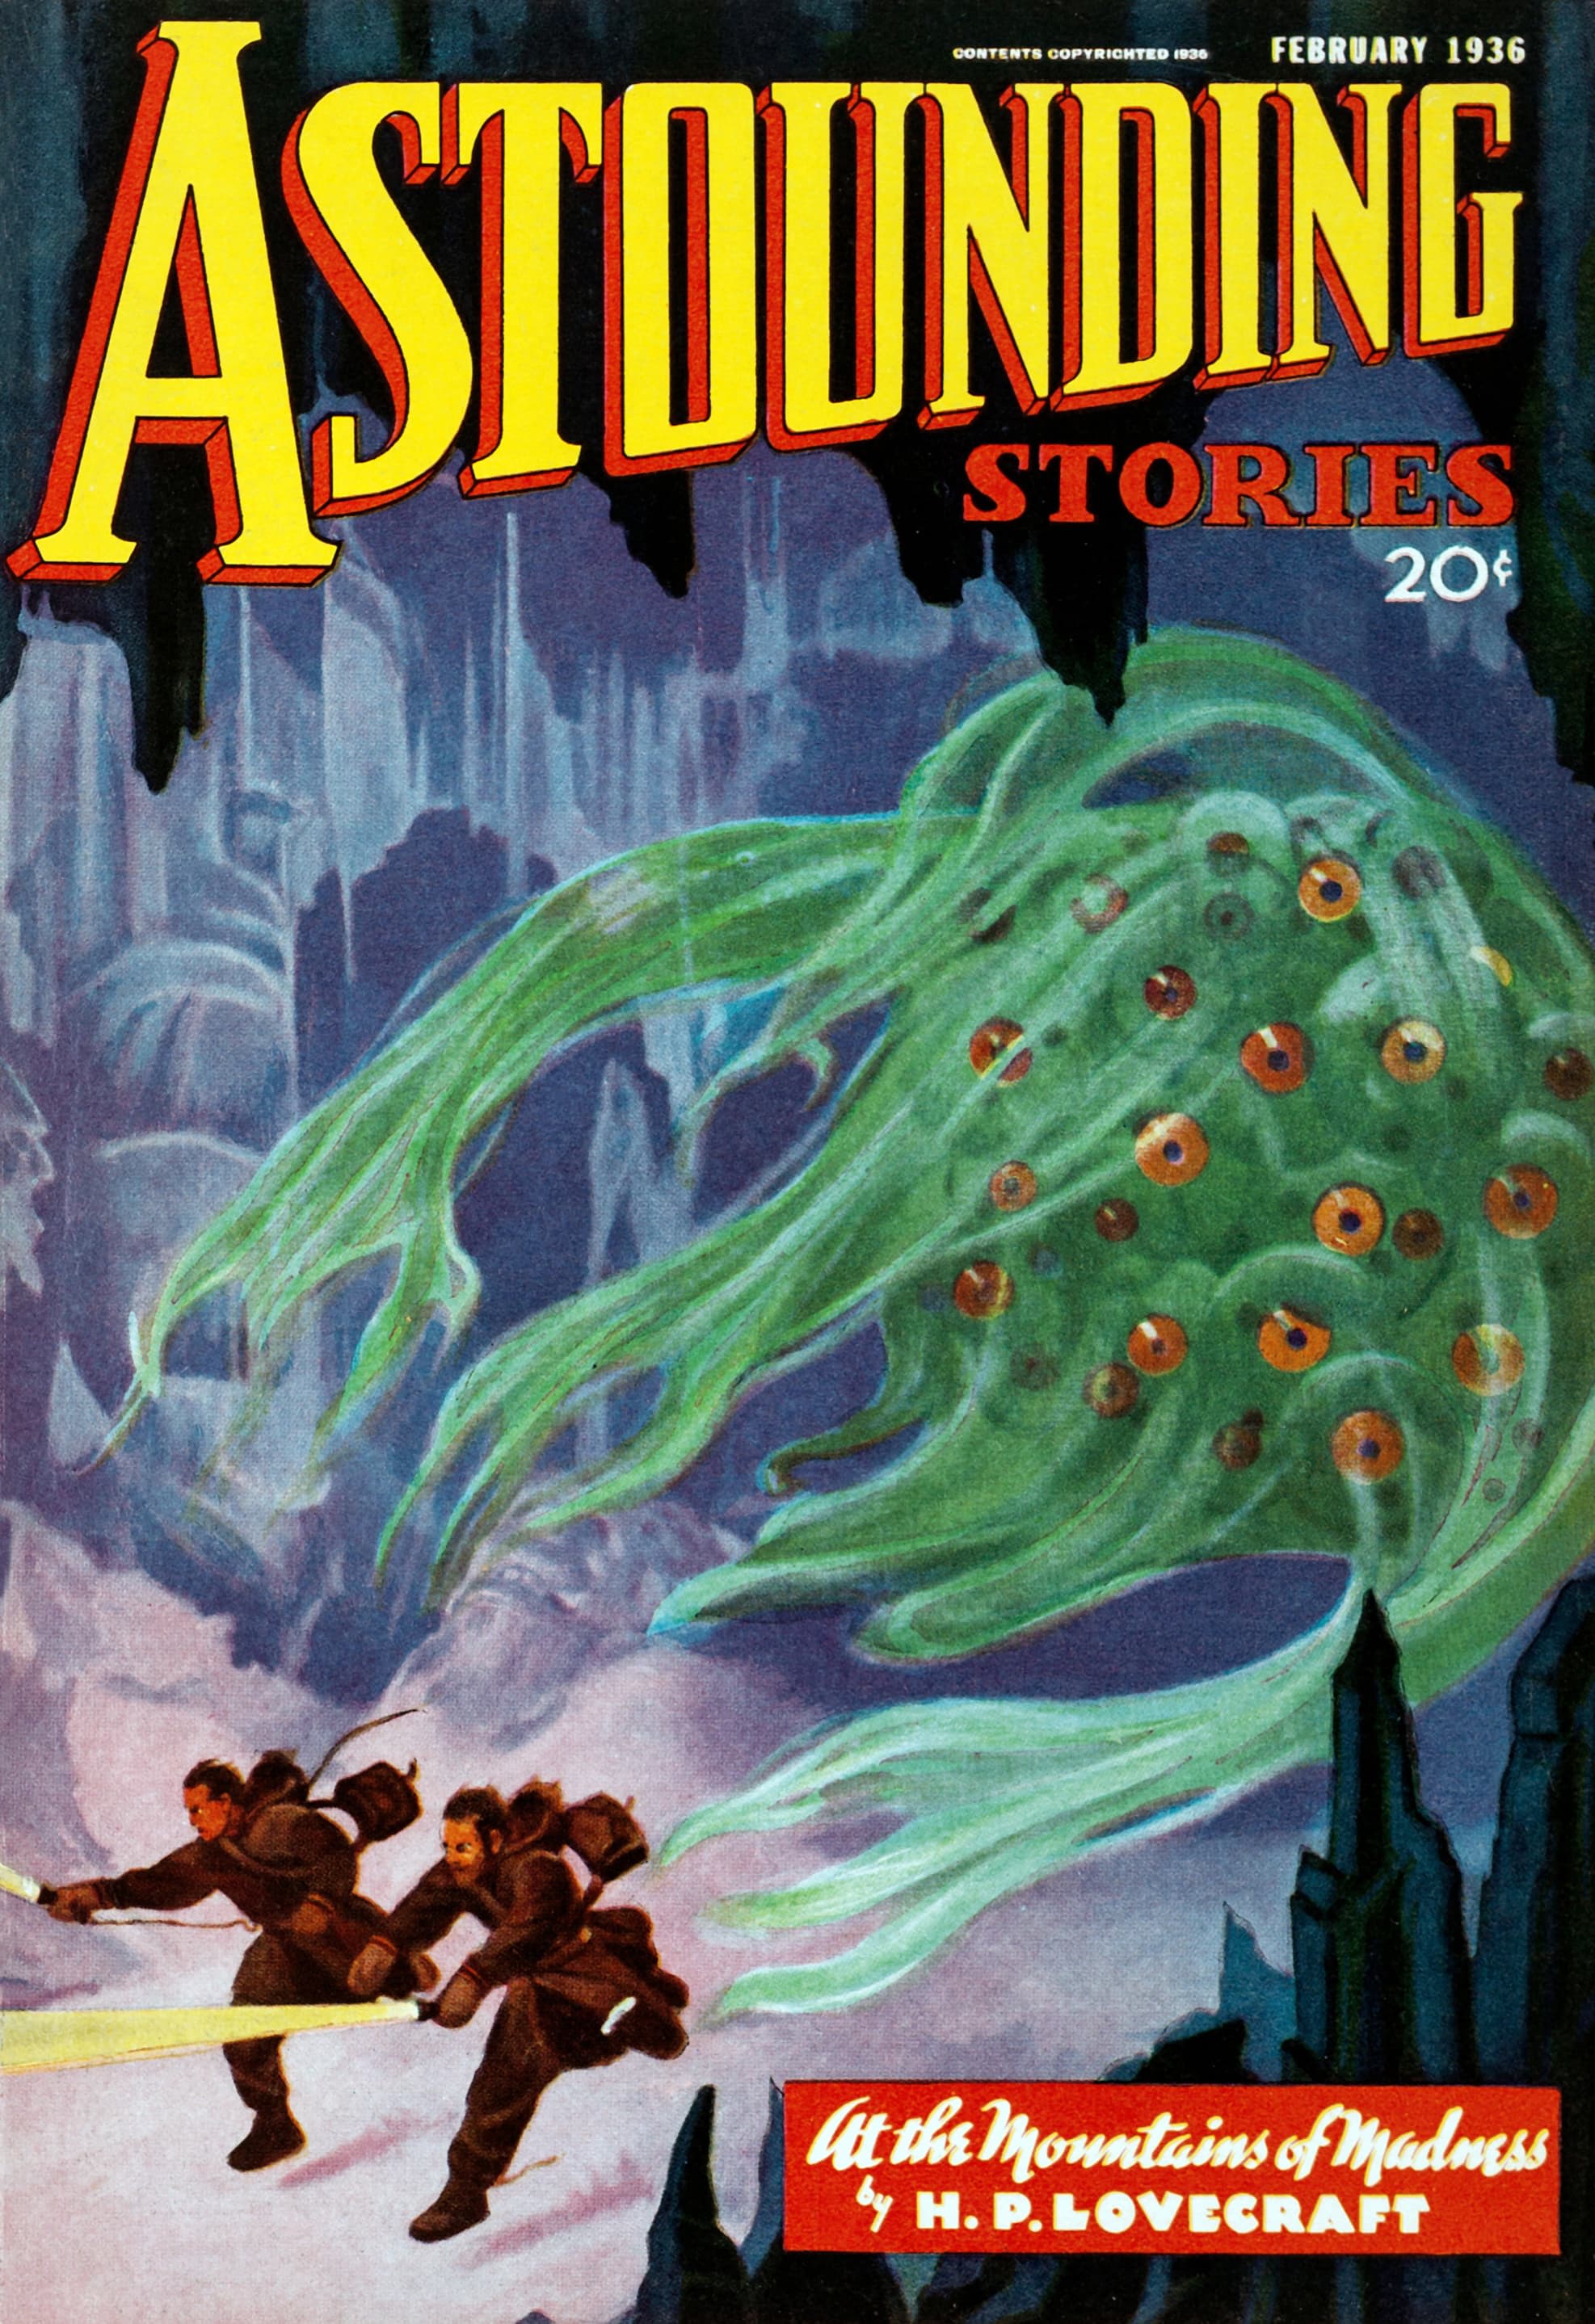 Astounding Stories - February 1936 (Street & Smith) - "At the Mountains of Madness" by H. P. Lovecraft. Artist Howard V. Brown, 1936 